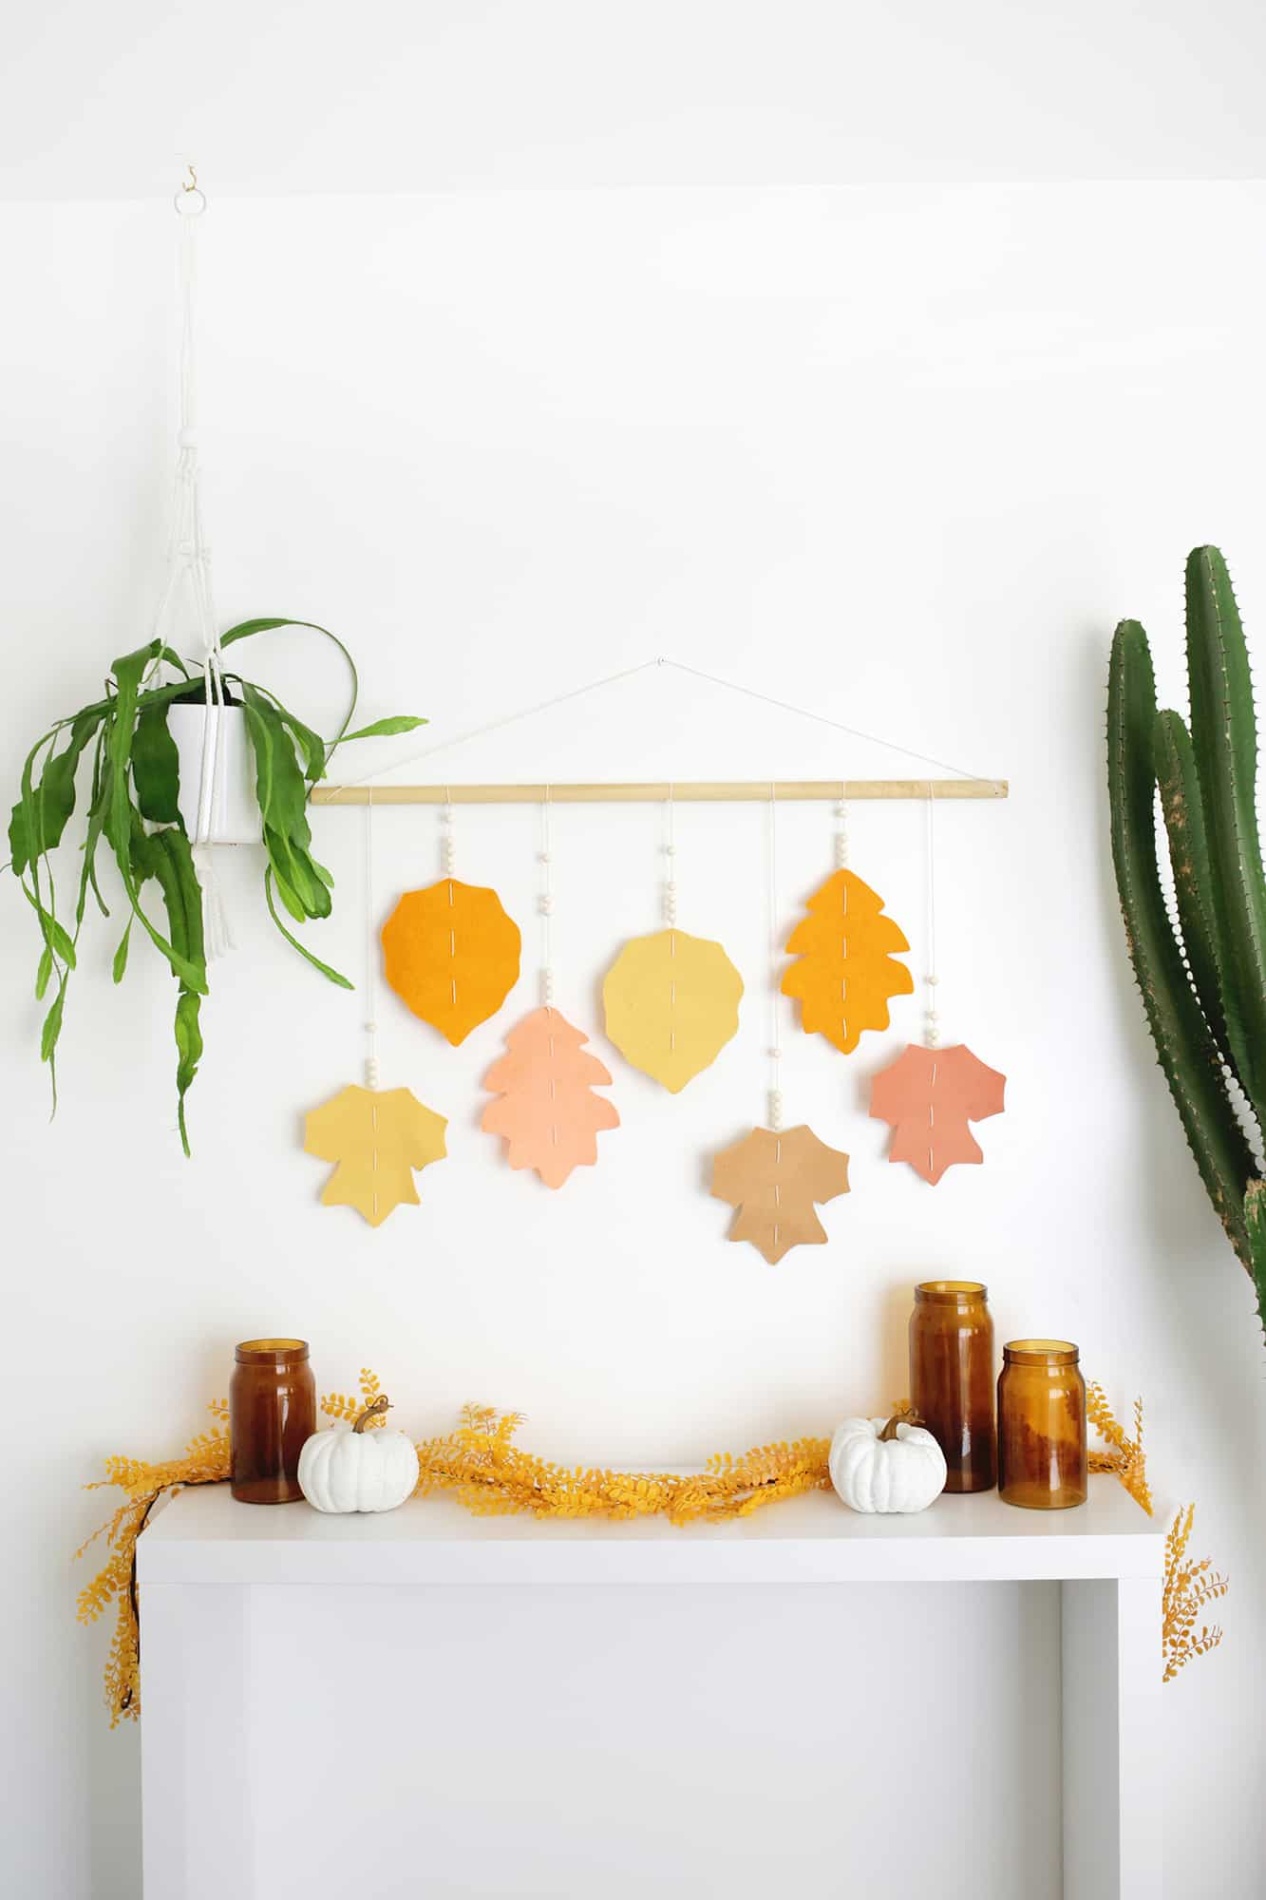 Transform Your Space: Easy And Creative DIY Wall Decor Ideas!